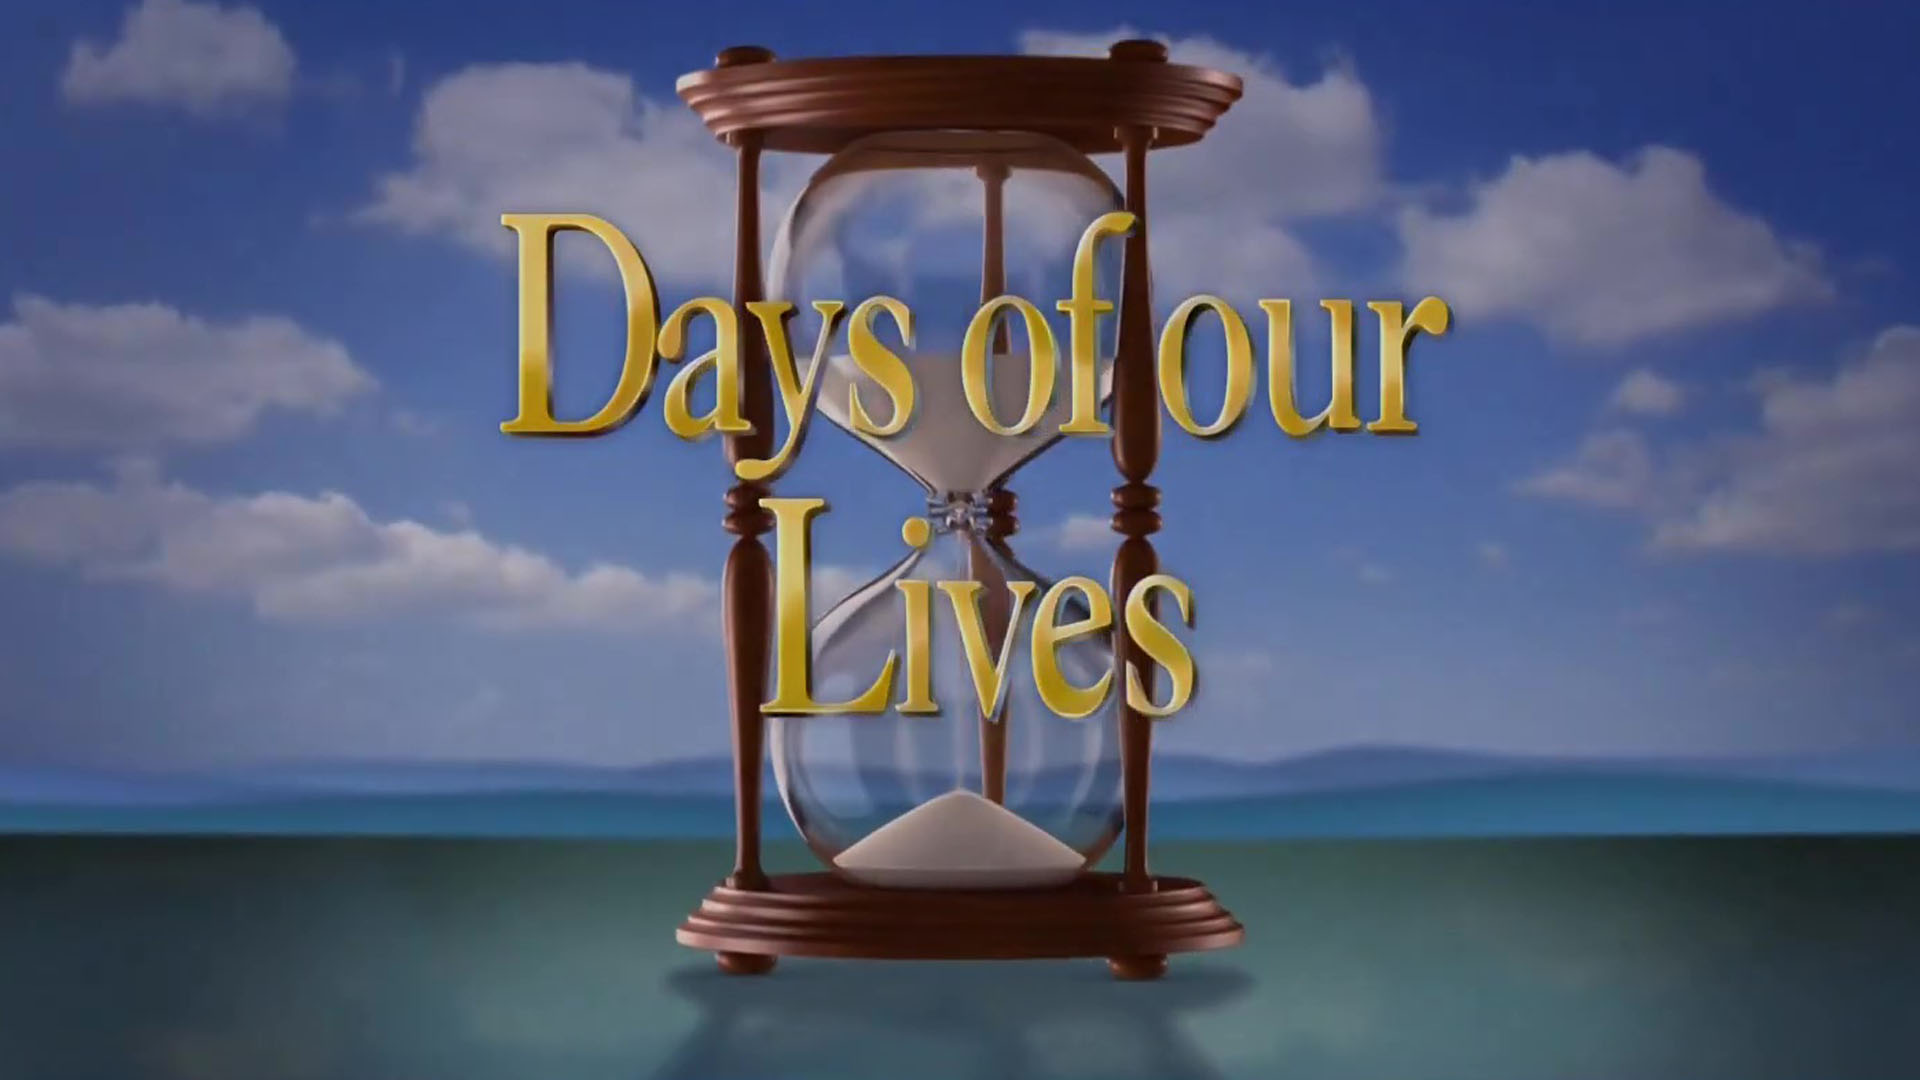 Appreciation: Growing Up with “Days of our Lives”